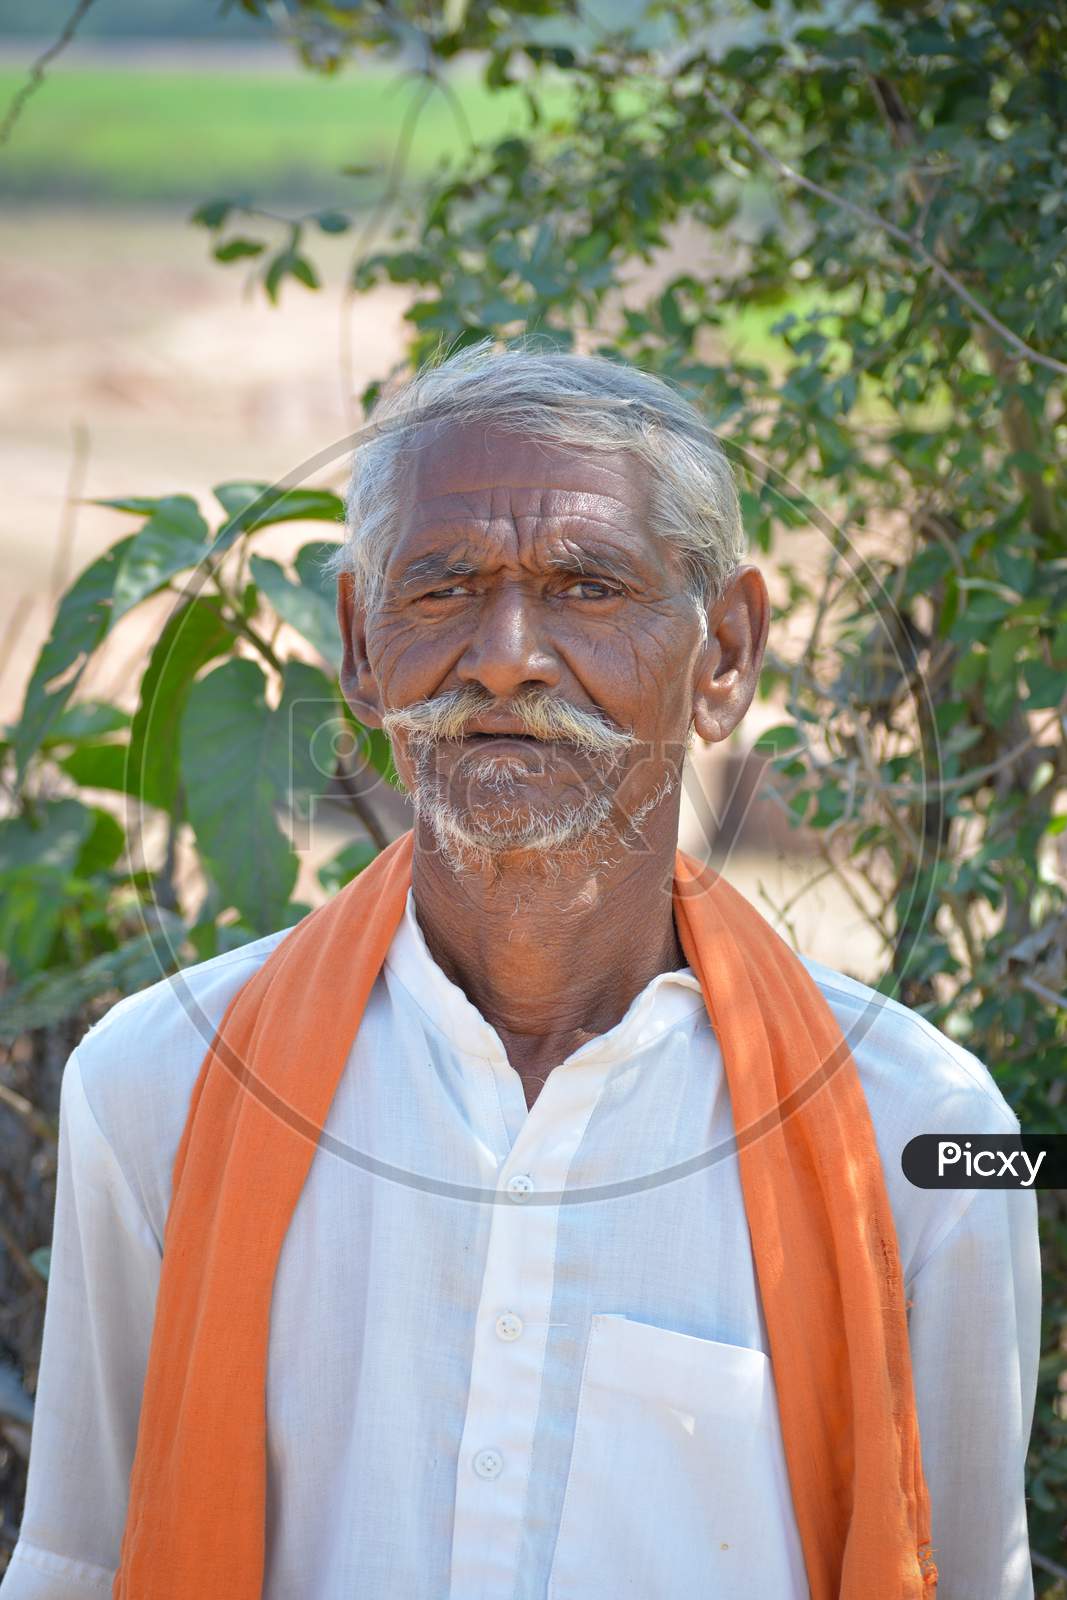 TIKAMGARH, MADHYA PRADESH, INDIA - FEBRUARY 03, 2020: A portrait of old unidentified indian man at his village.